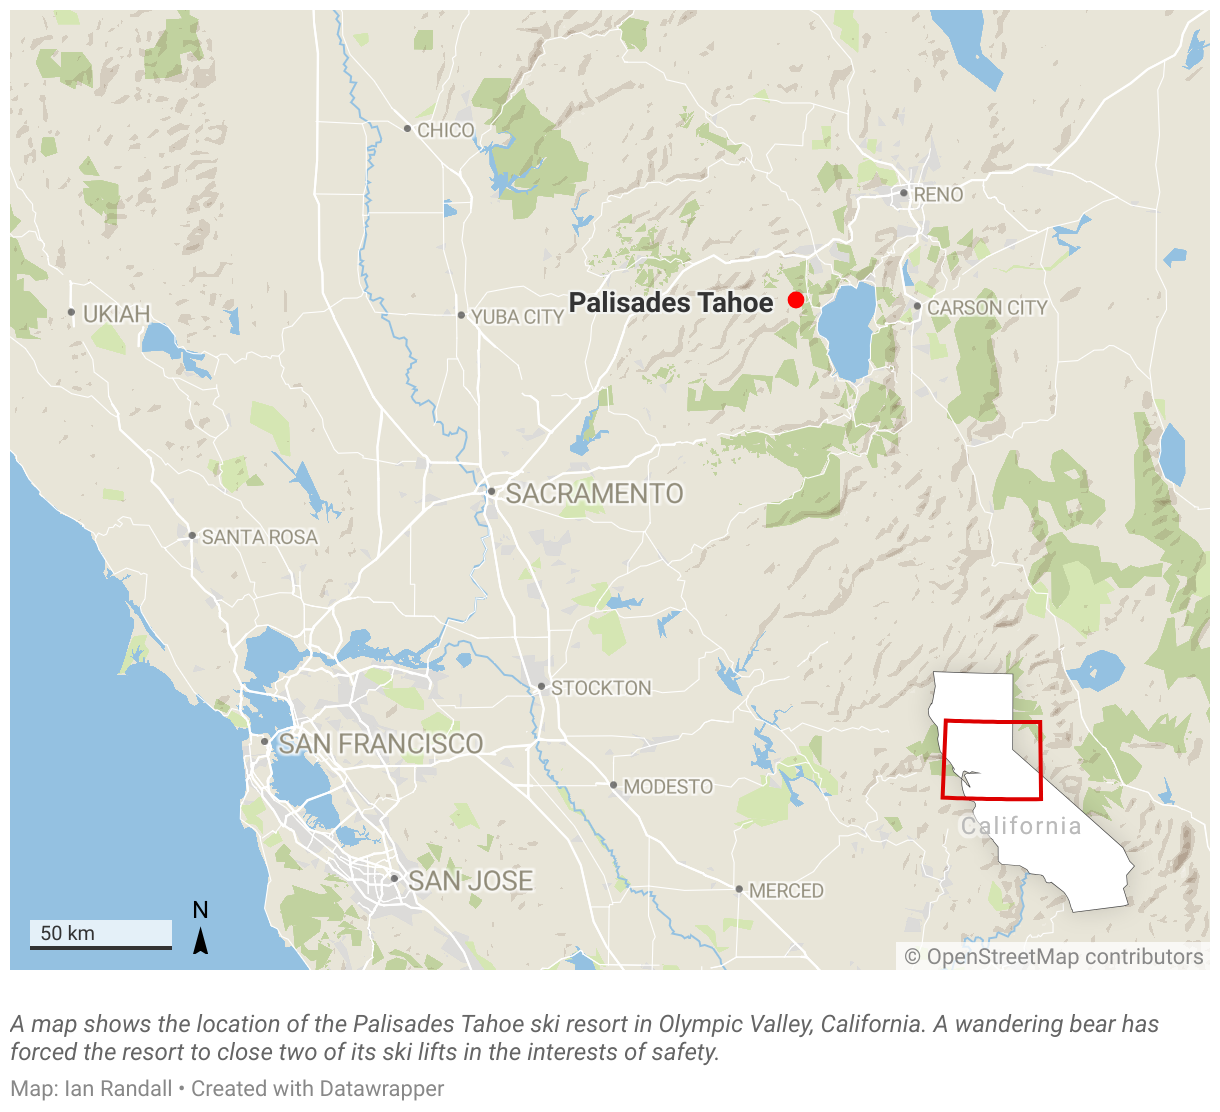 A map shows the location of the Palisades Tahoe ski resort in Olympic Valley, California.